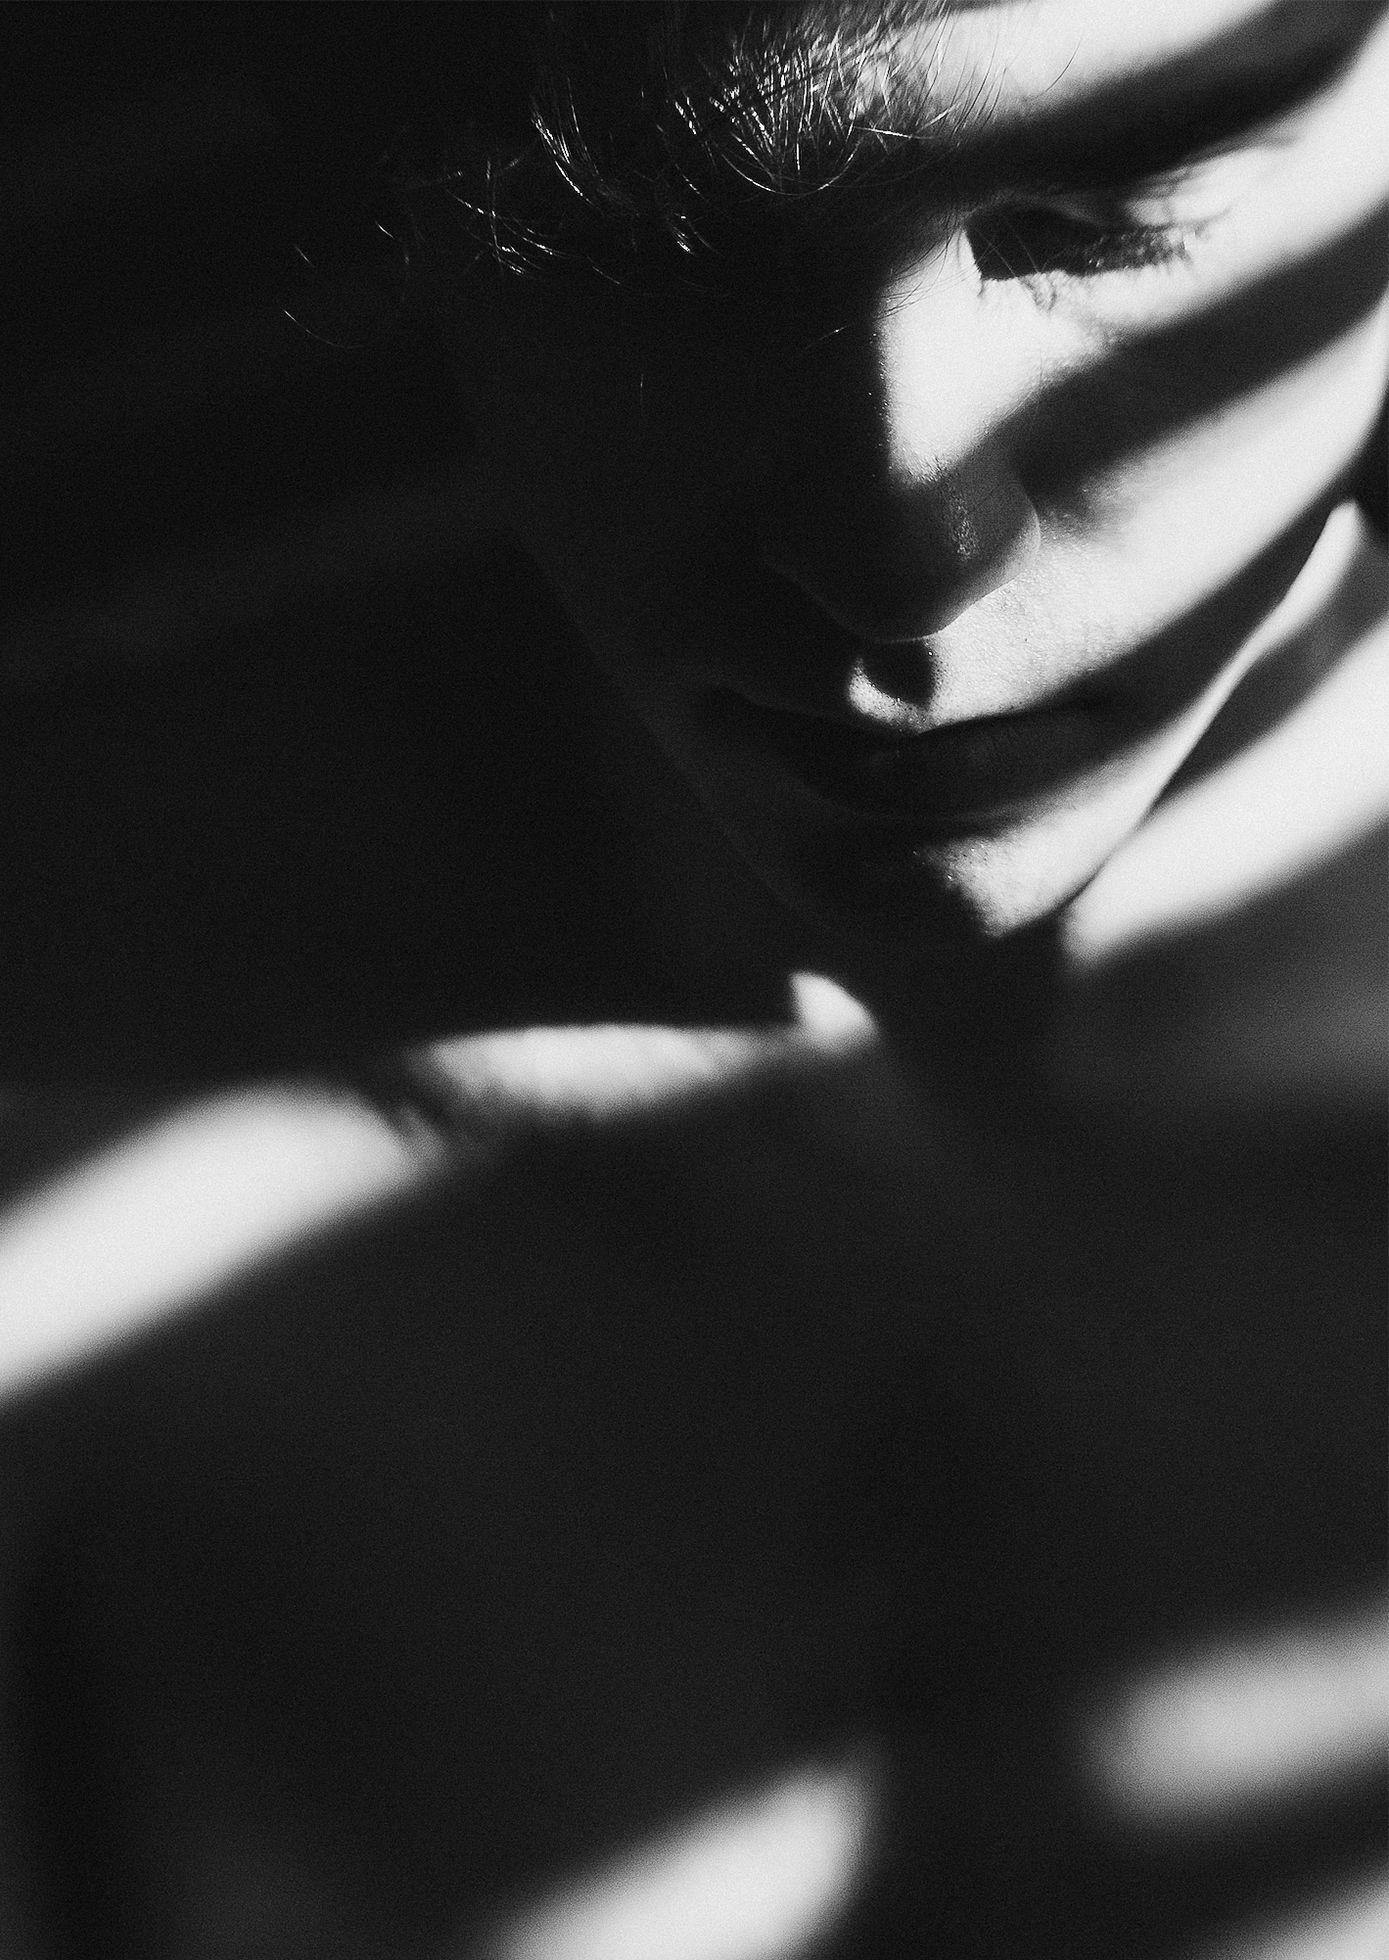 A young, shirtless boy in a darkened room with light from slightly opened blinds looks down. His face and upper torso are awash in shadow and light.